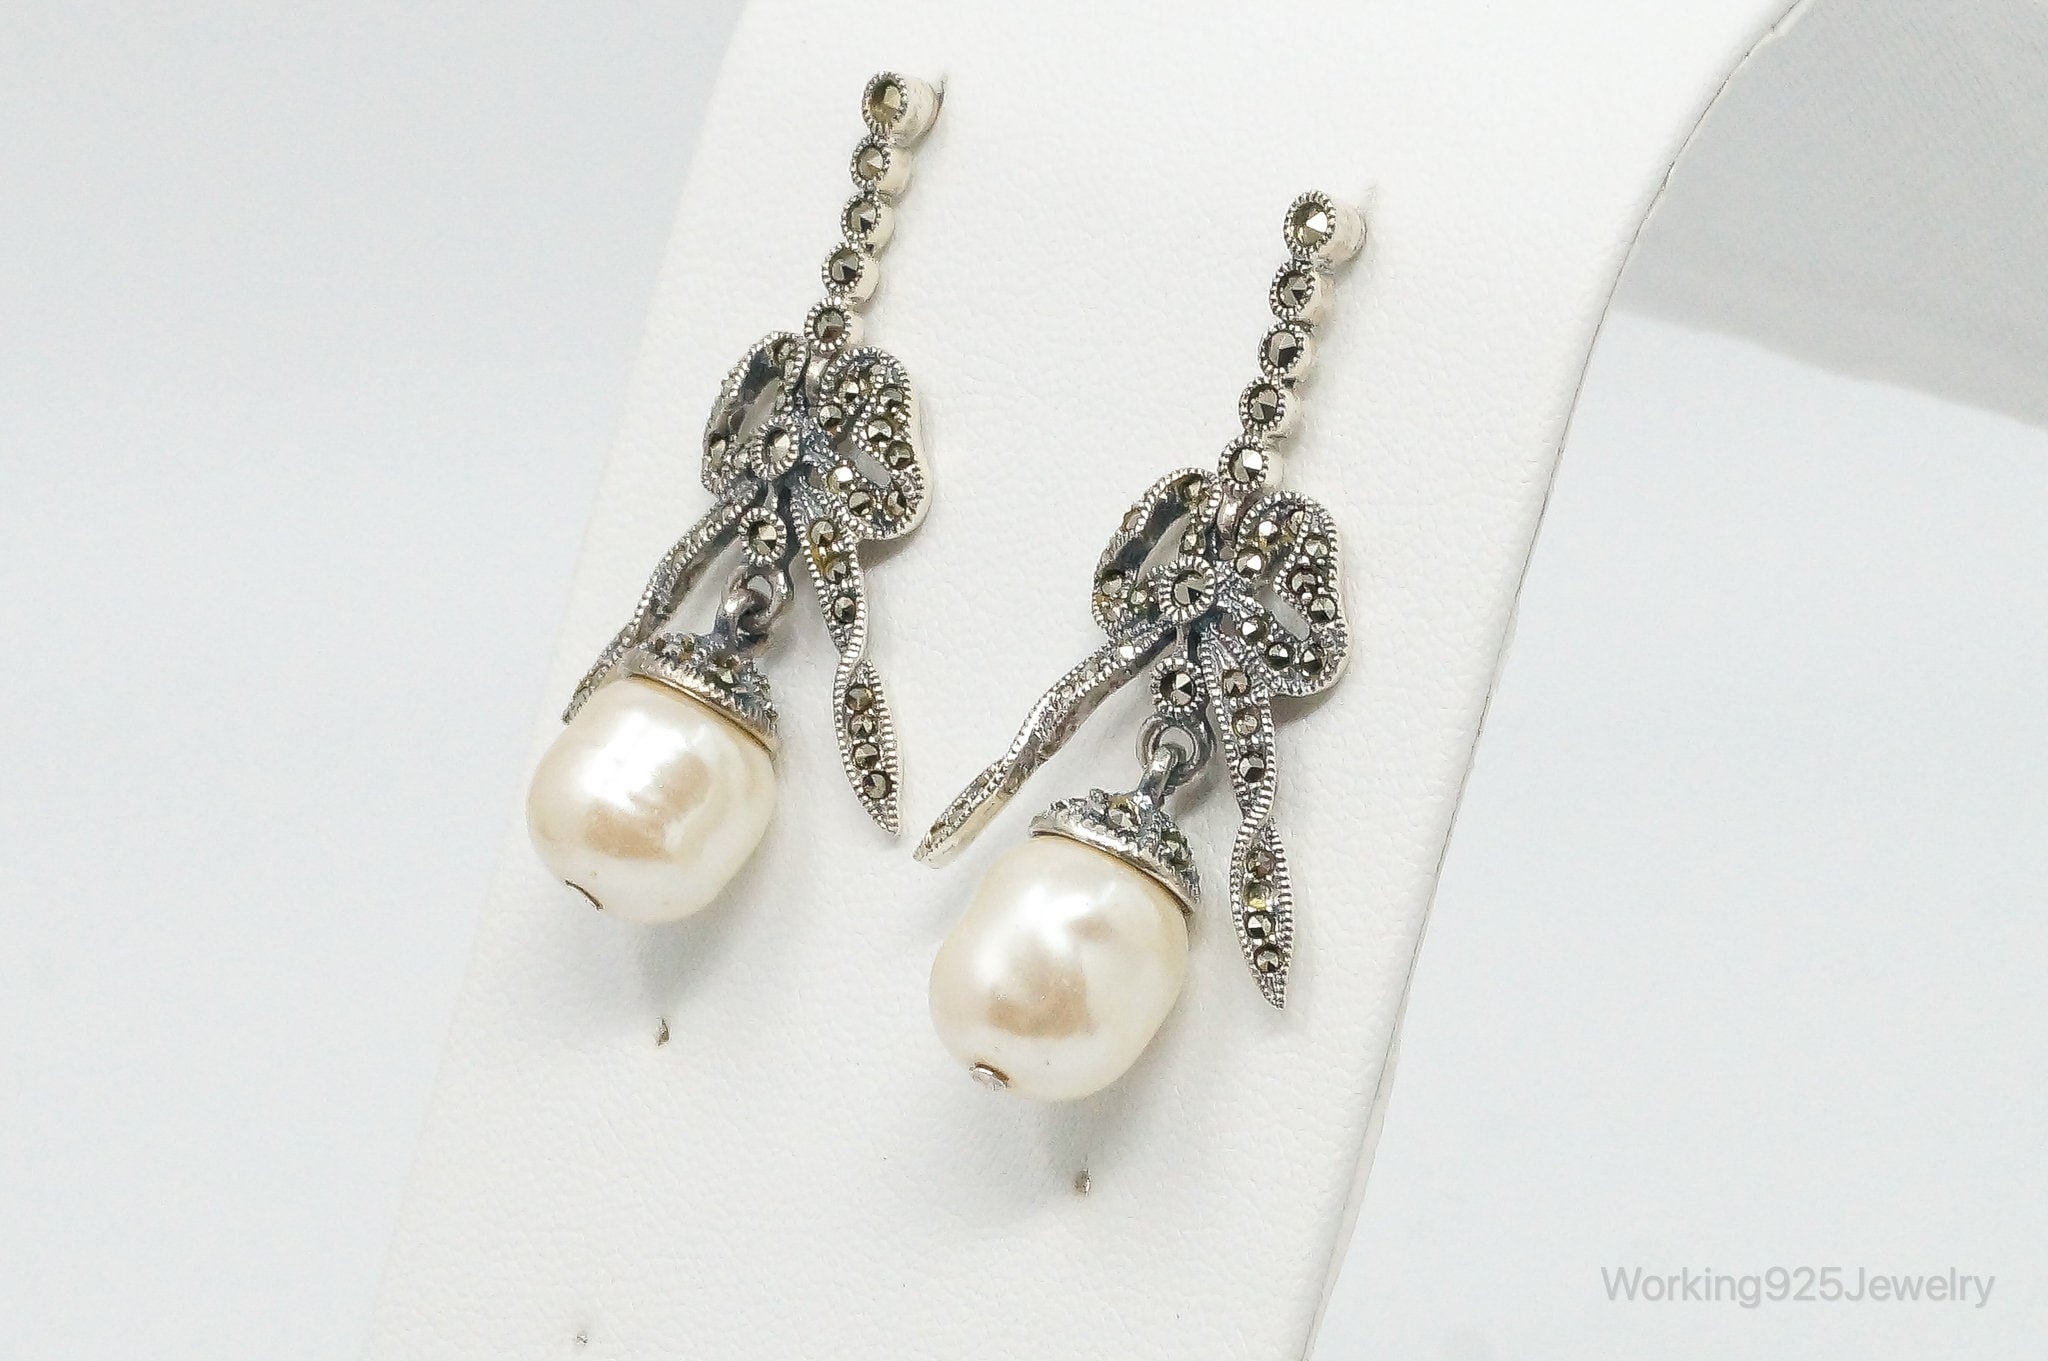 Rare Vintage Judith Jack Marcasite Pearl Sterling Silver Bow Earrings